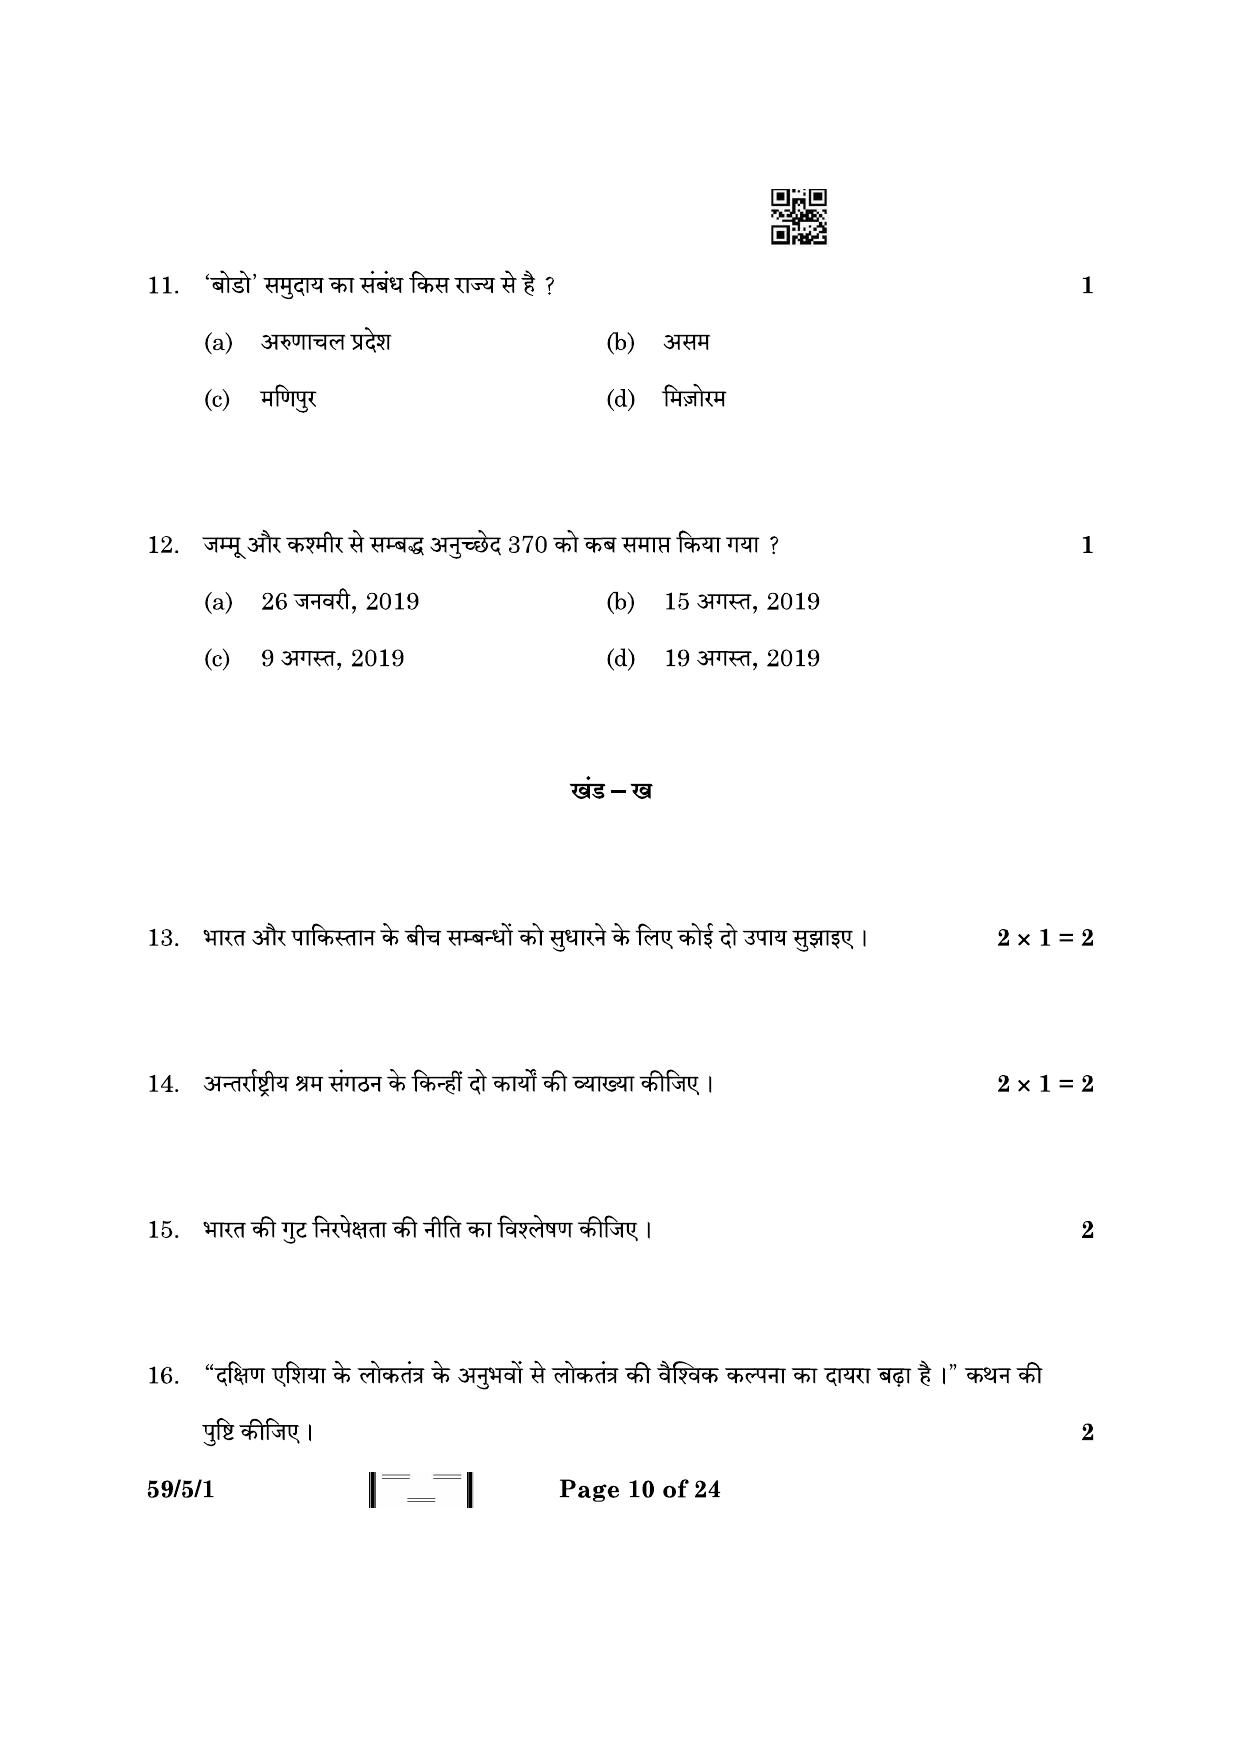 CBSE Class 12 59-5-1 Political Science 2023 Question Paper - Page 10